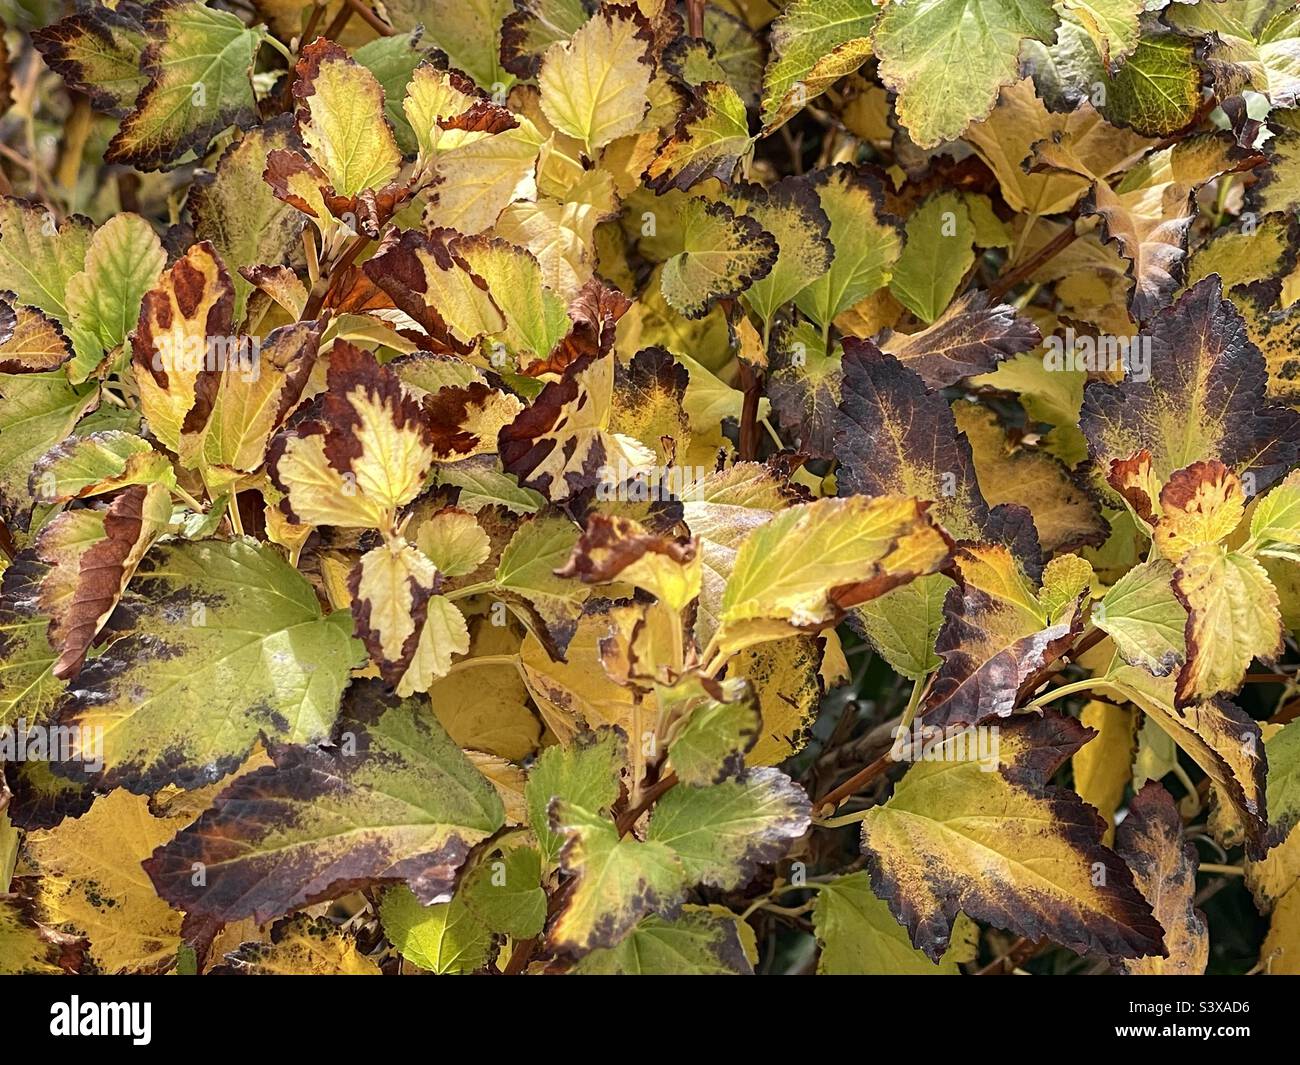 Beautiful natural abstract made up of these changing leaves on shrubbery during the autumn in Utah, USA on the landscaped grounds of a local church house. Stock Photo